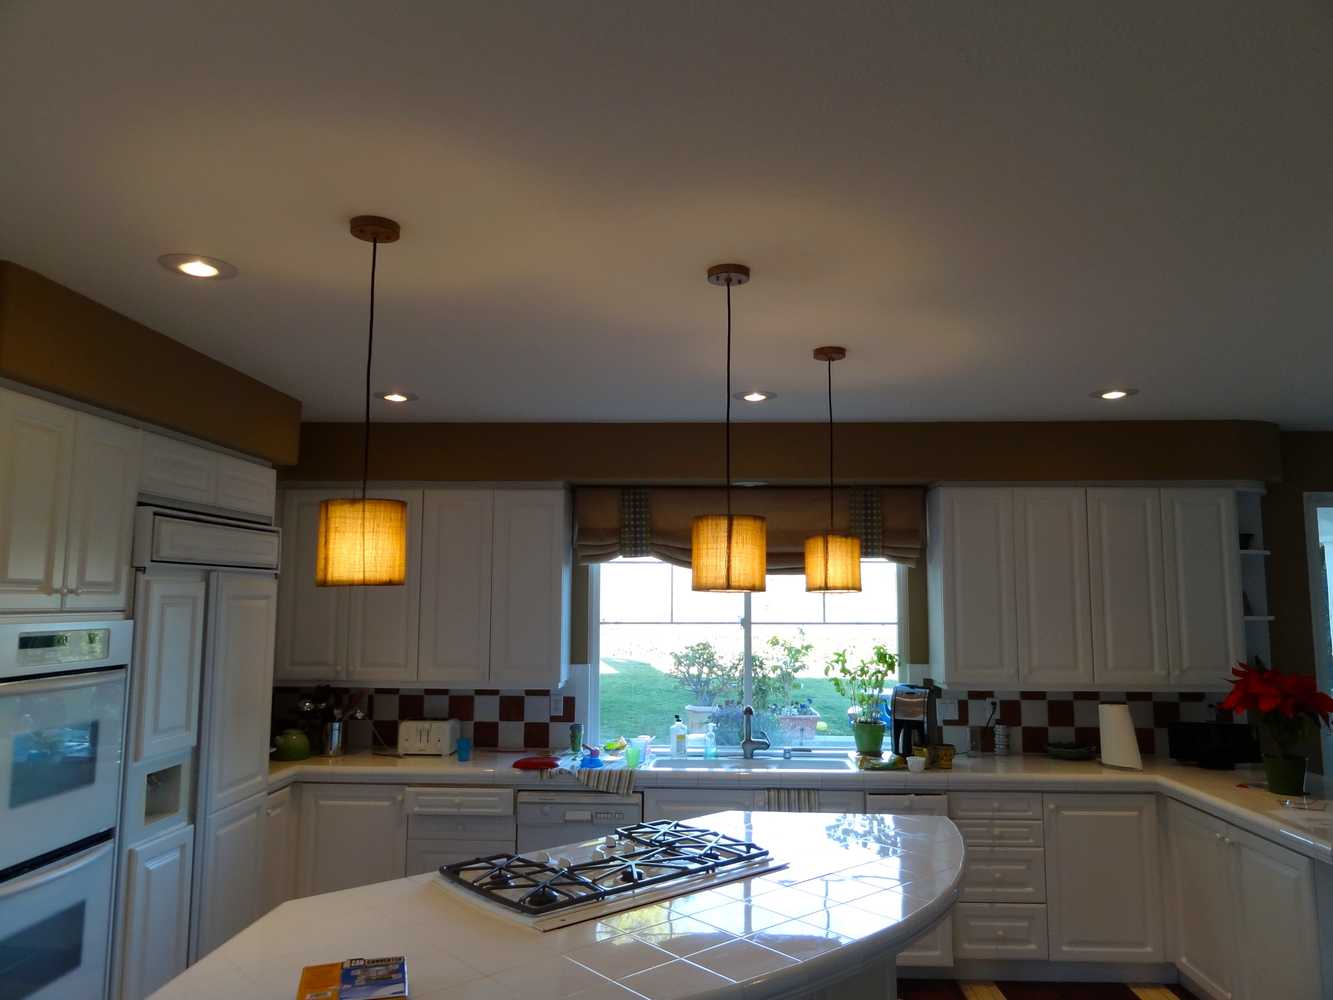 Carlsbad, California. pendants over Island and Chandalier over dining table.